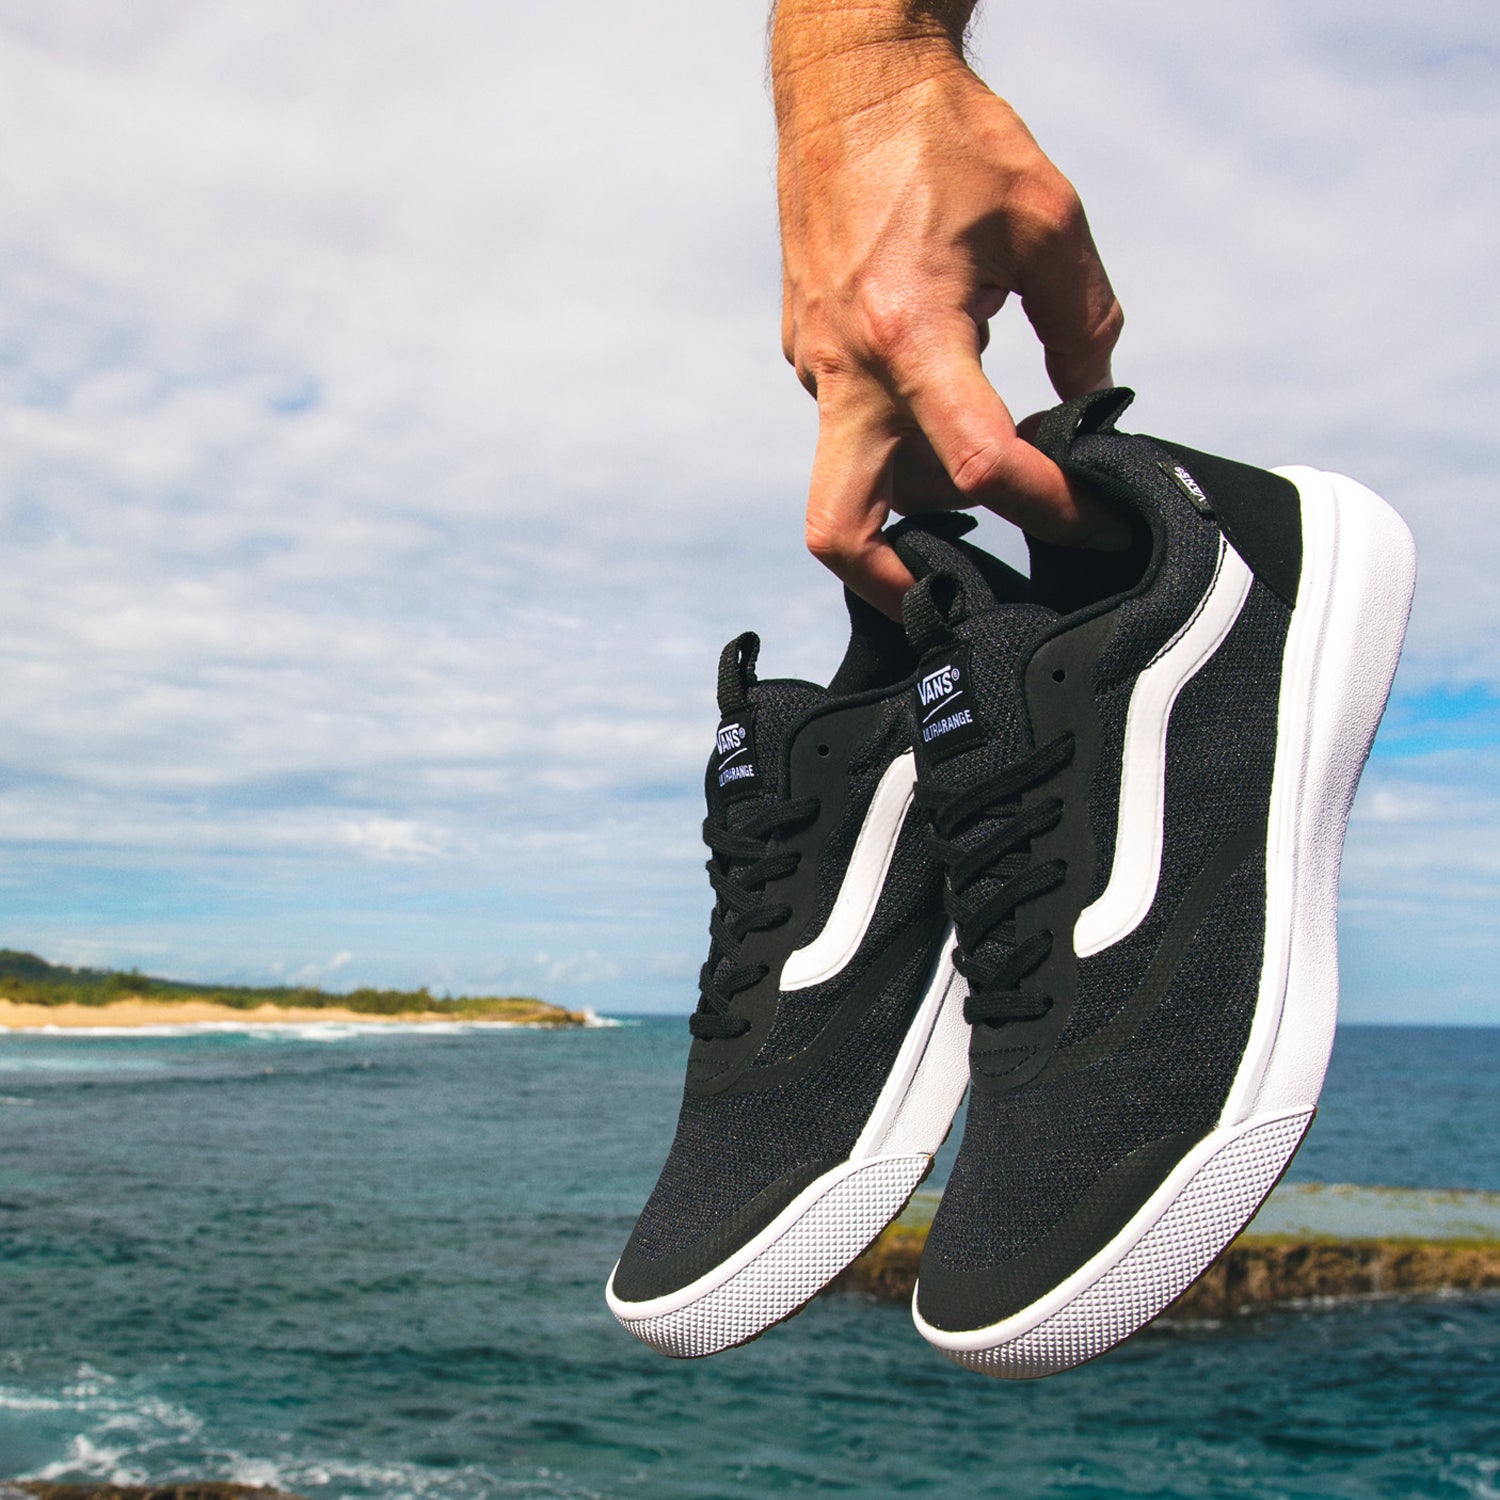 Tot ziens actie Moedig The Vans UltraRange Are the Best Shoes for Traveling - Outside Online